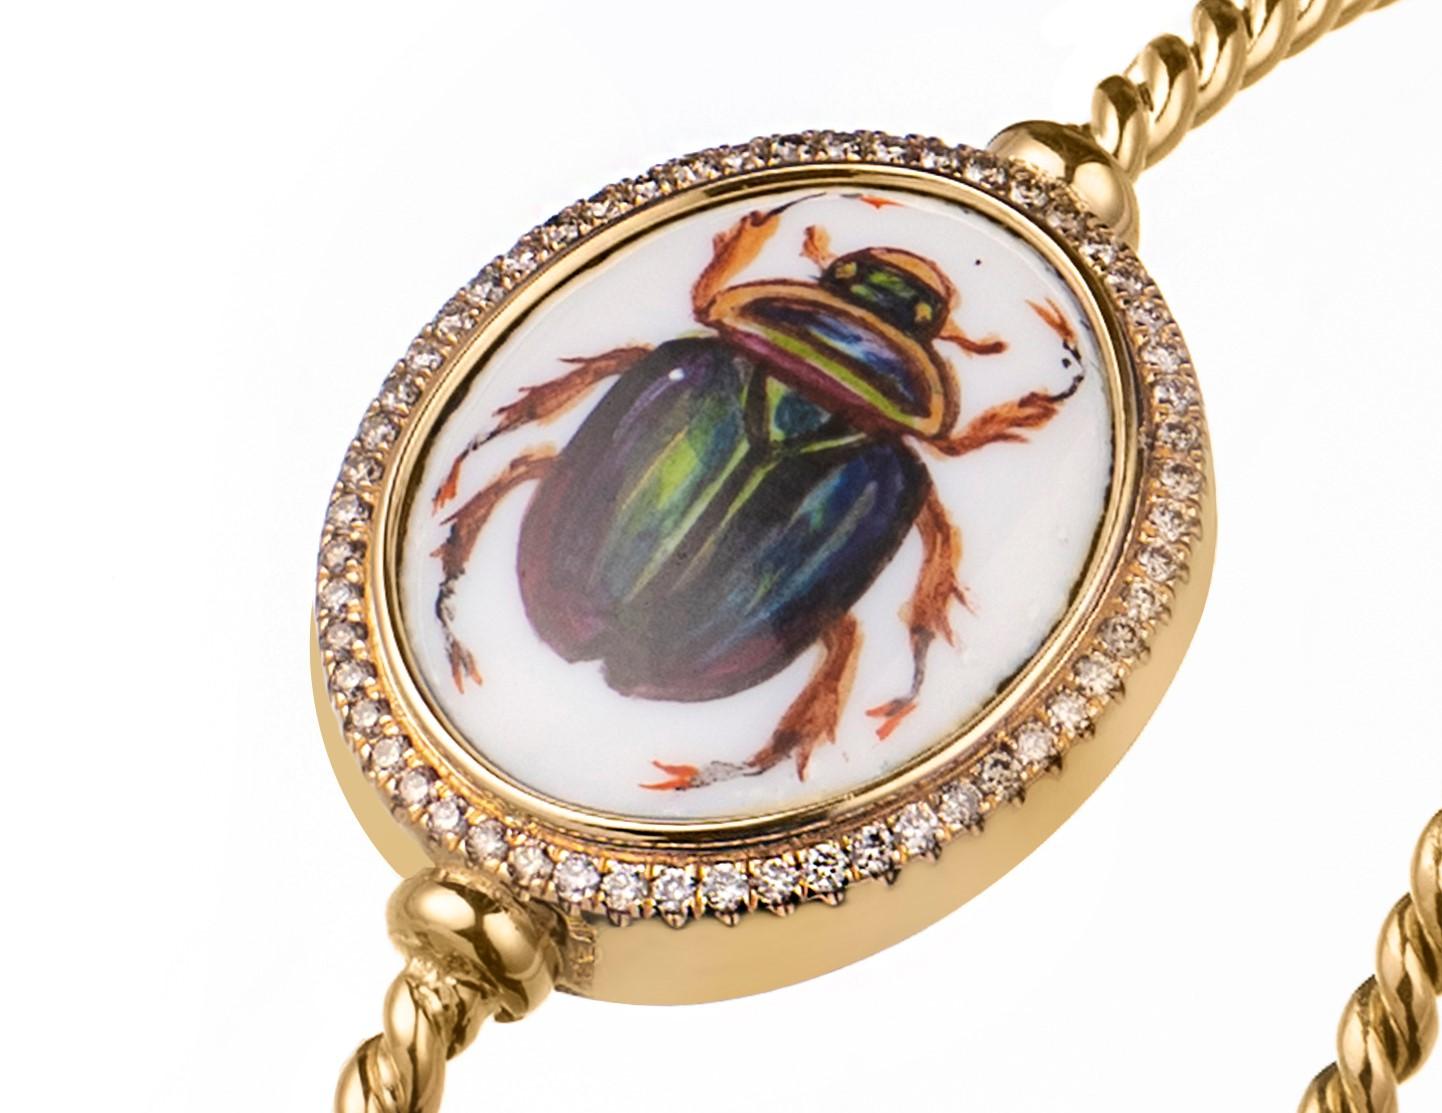 14K Yellow Gold
Hand-painted Enamel Scarabs
0.20ct brilliant-cut Champagne Diamonds
Scarab measurements: 1.8cm wide, 2cm tall

The Scarab speaks BEGIN, the Heavenly Cycle, Rebirth, One’s Own Journey.